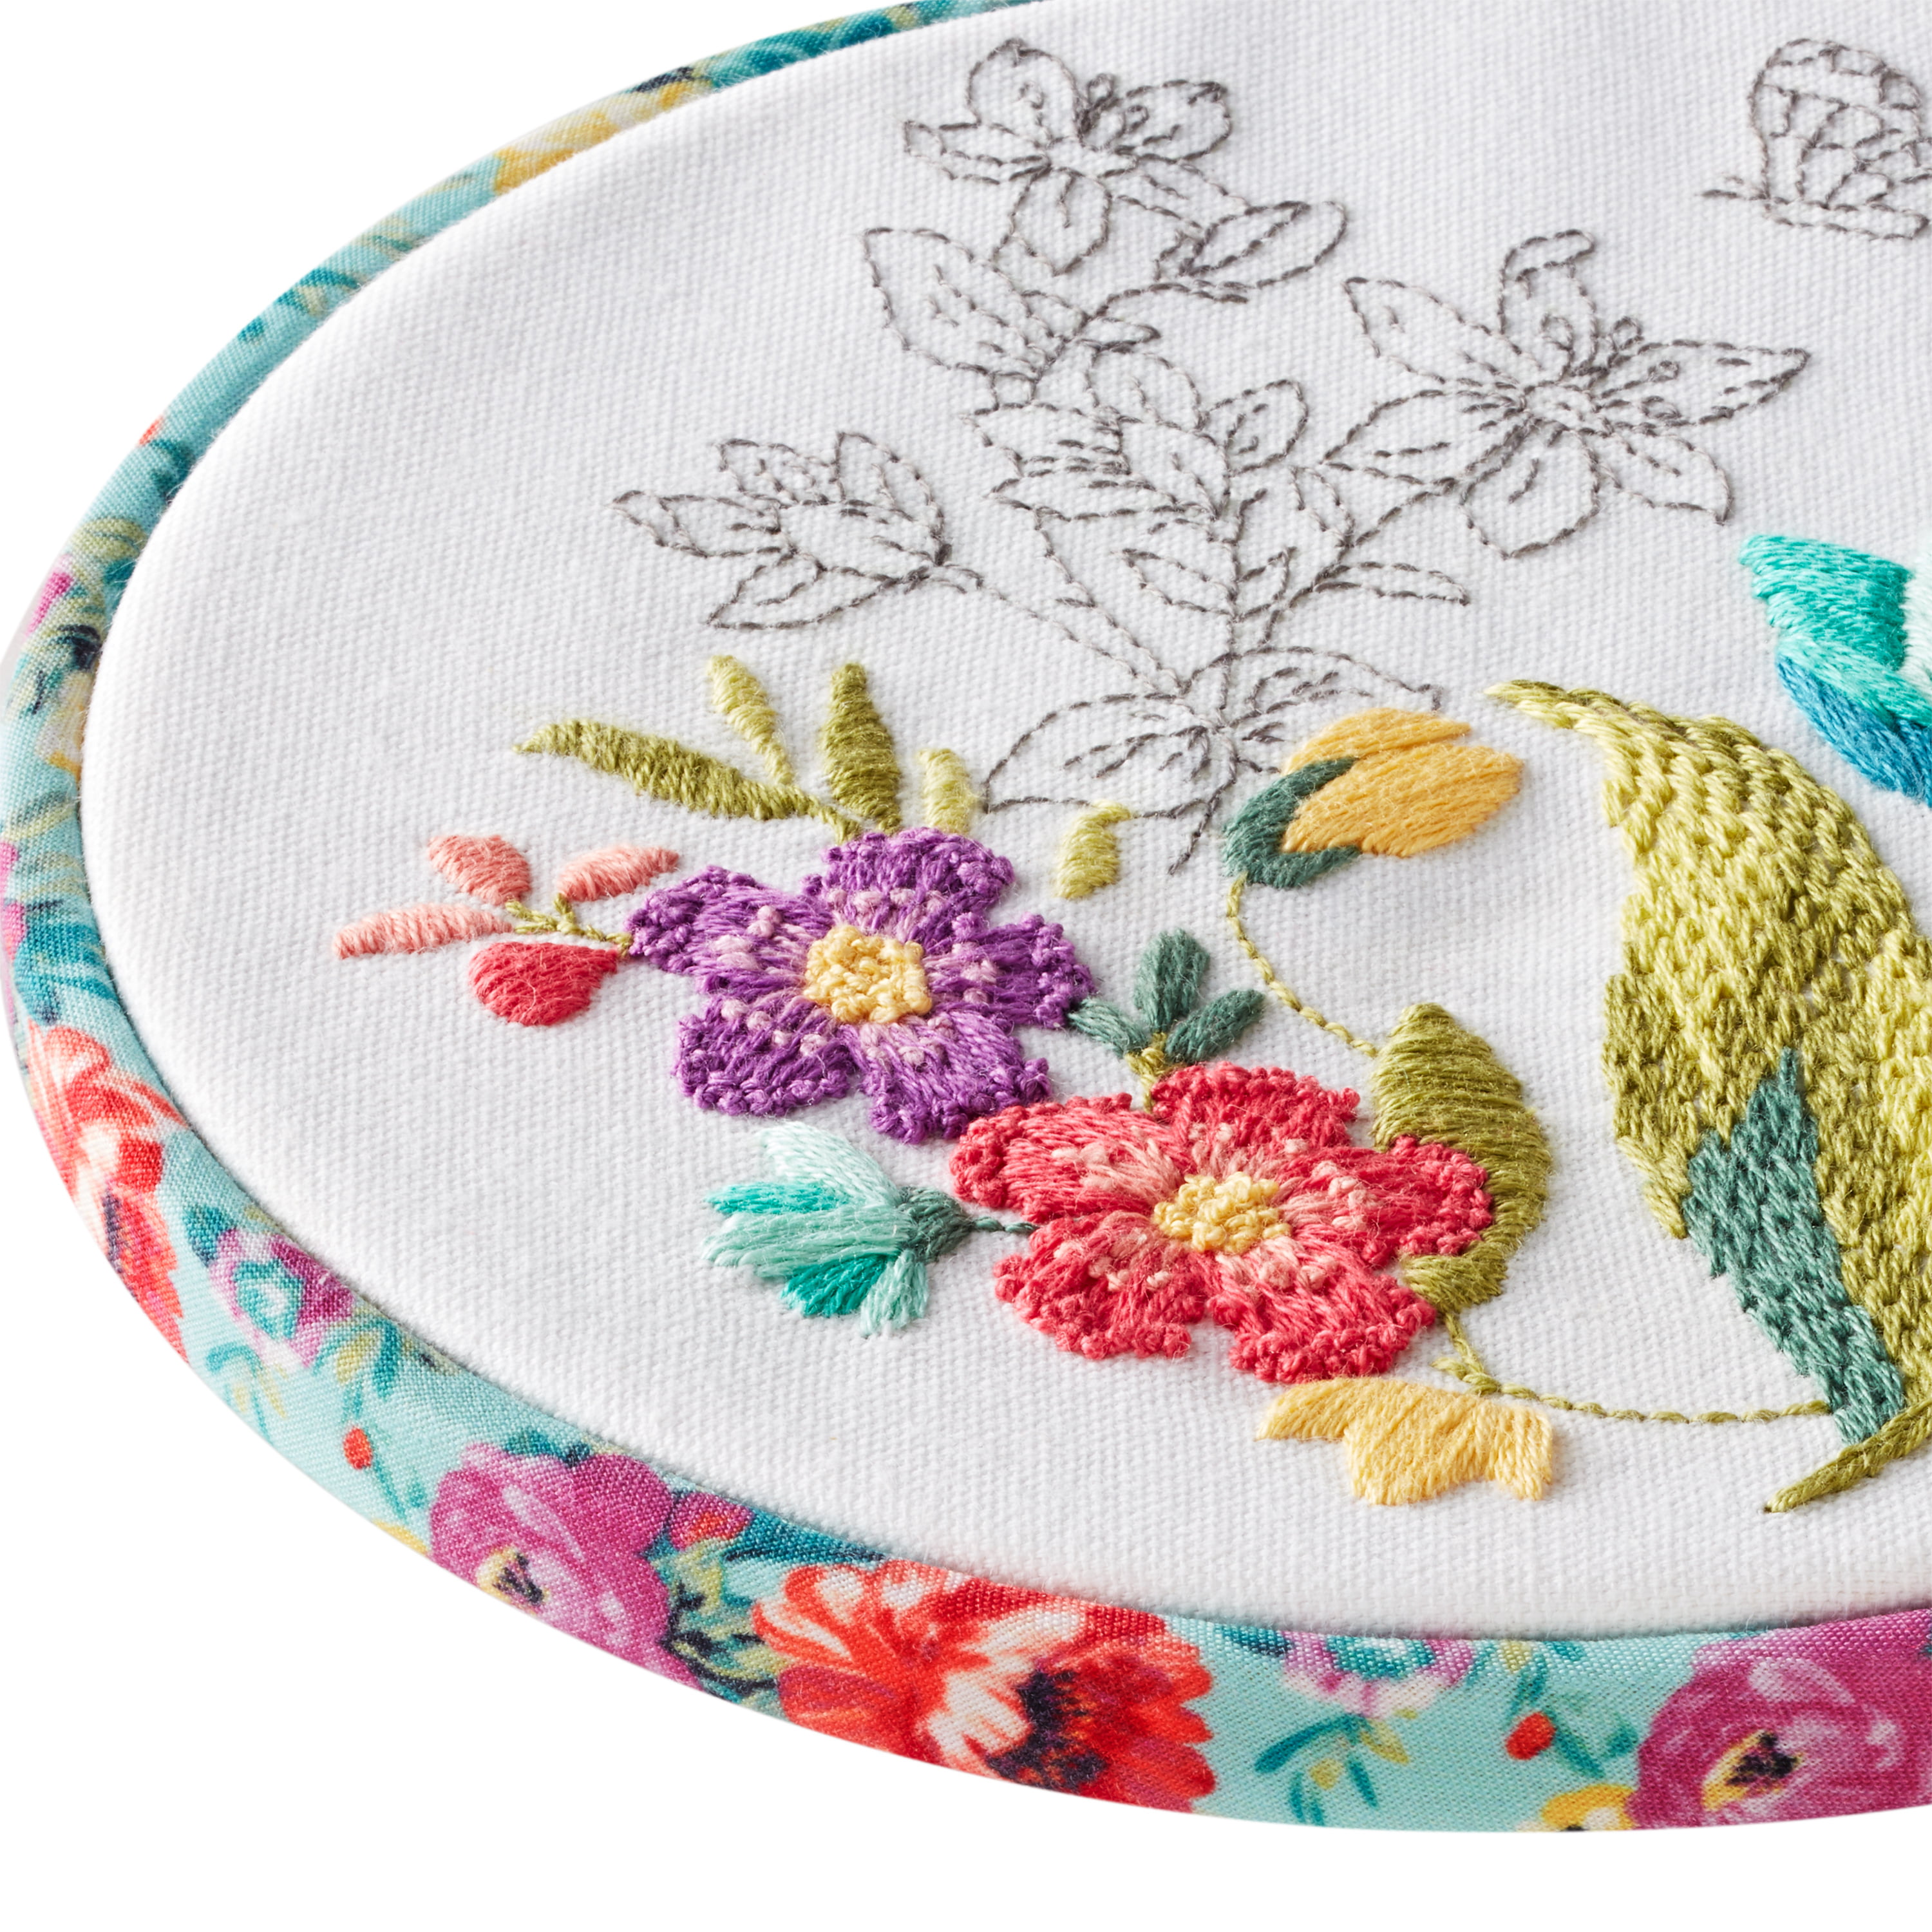 The Pioneer Woman Embroidery Kits - Where to Buy Ree Drummond's